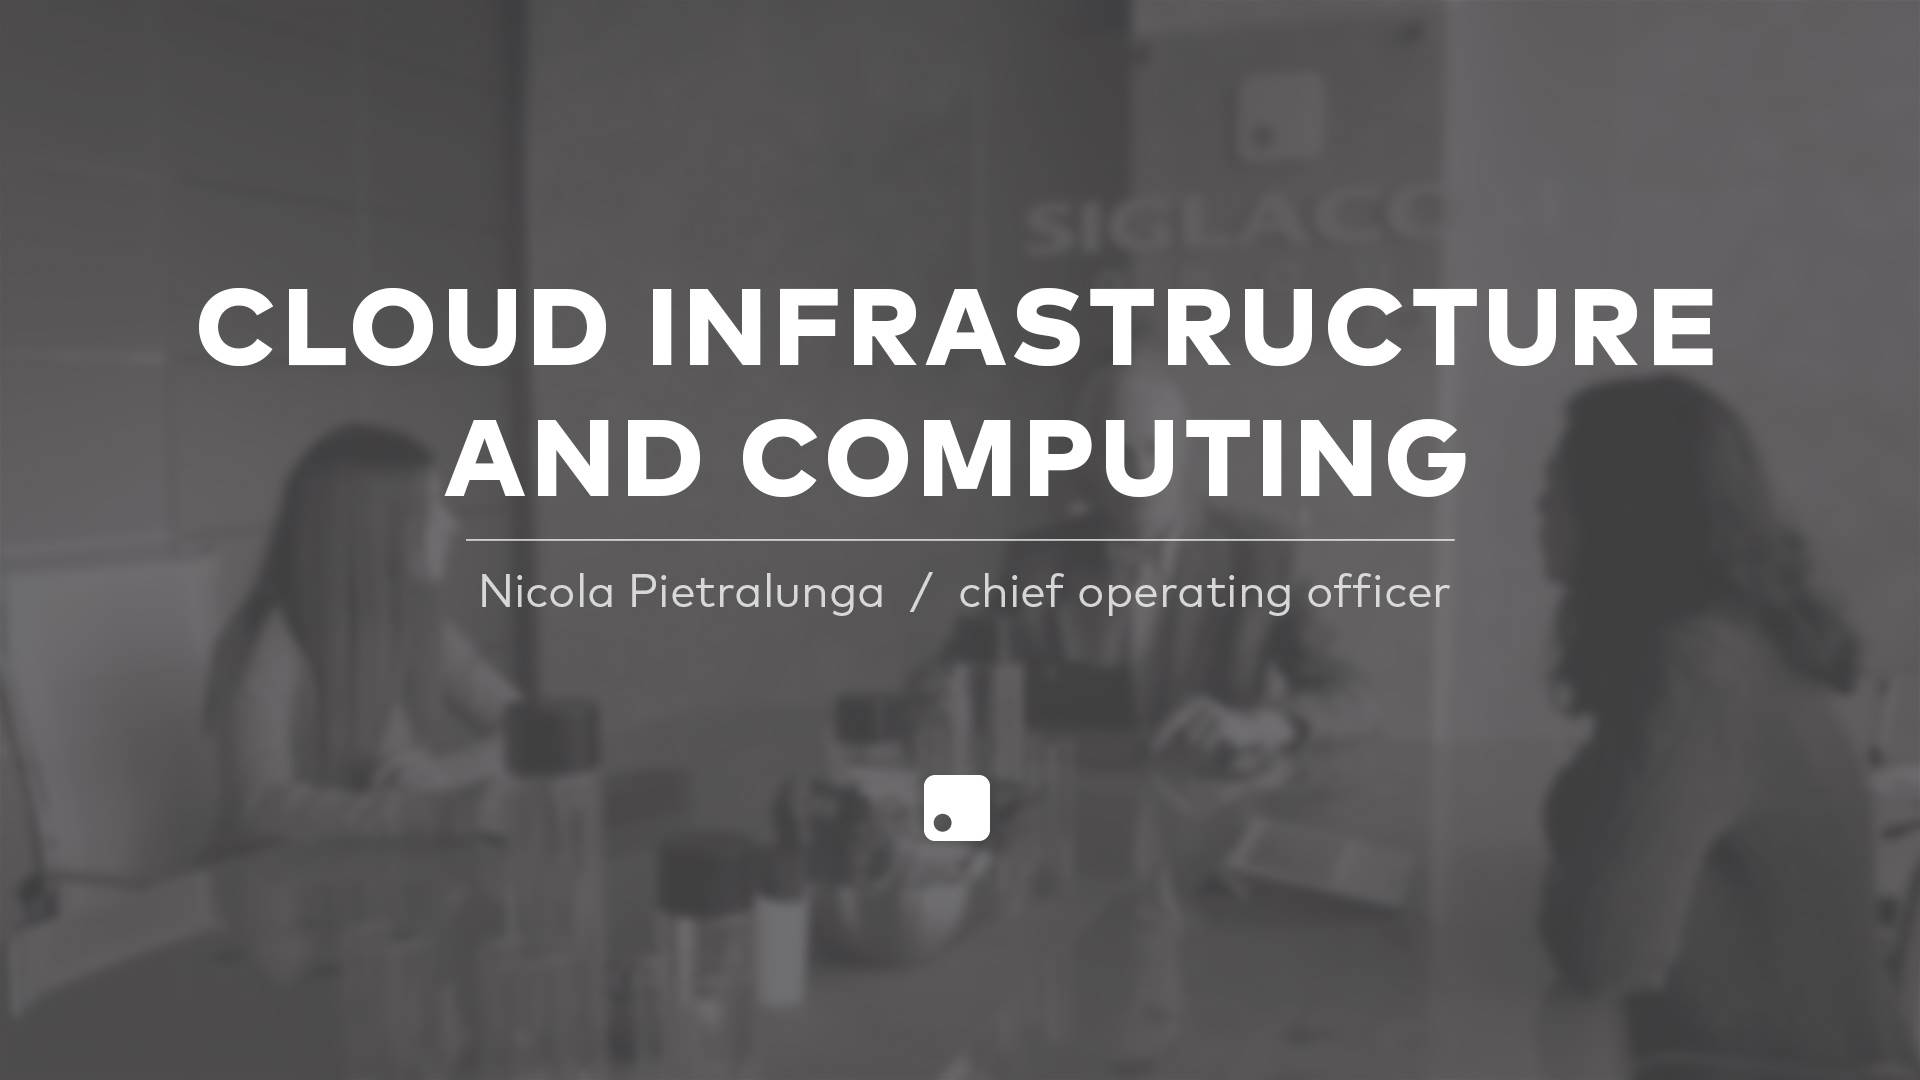 Cloud infrastructure and computing